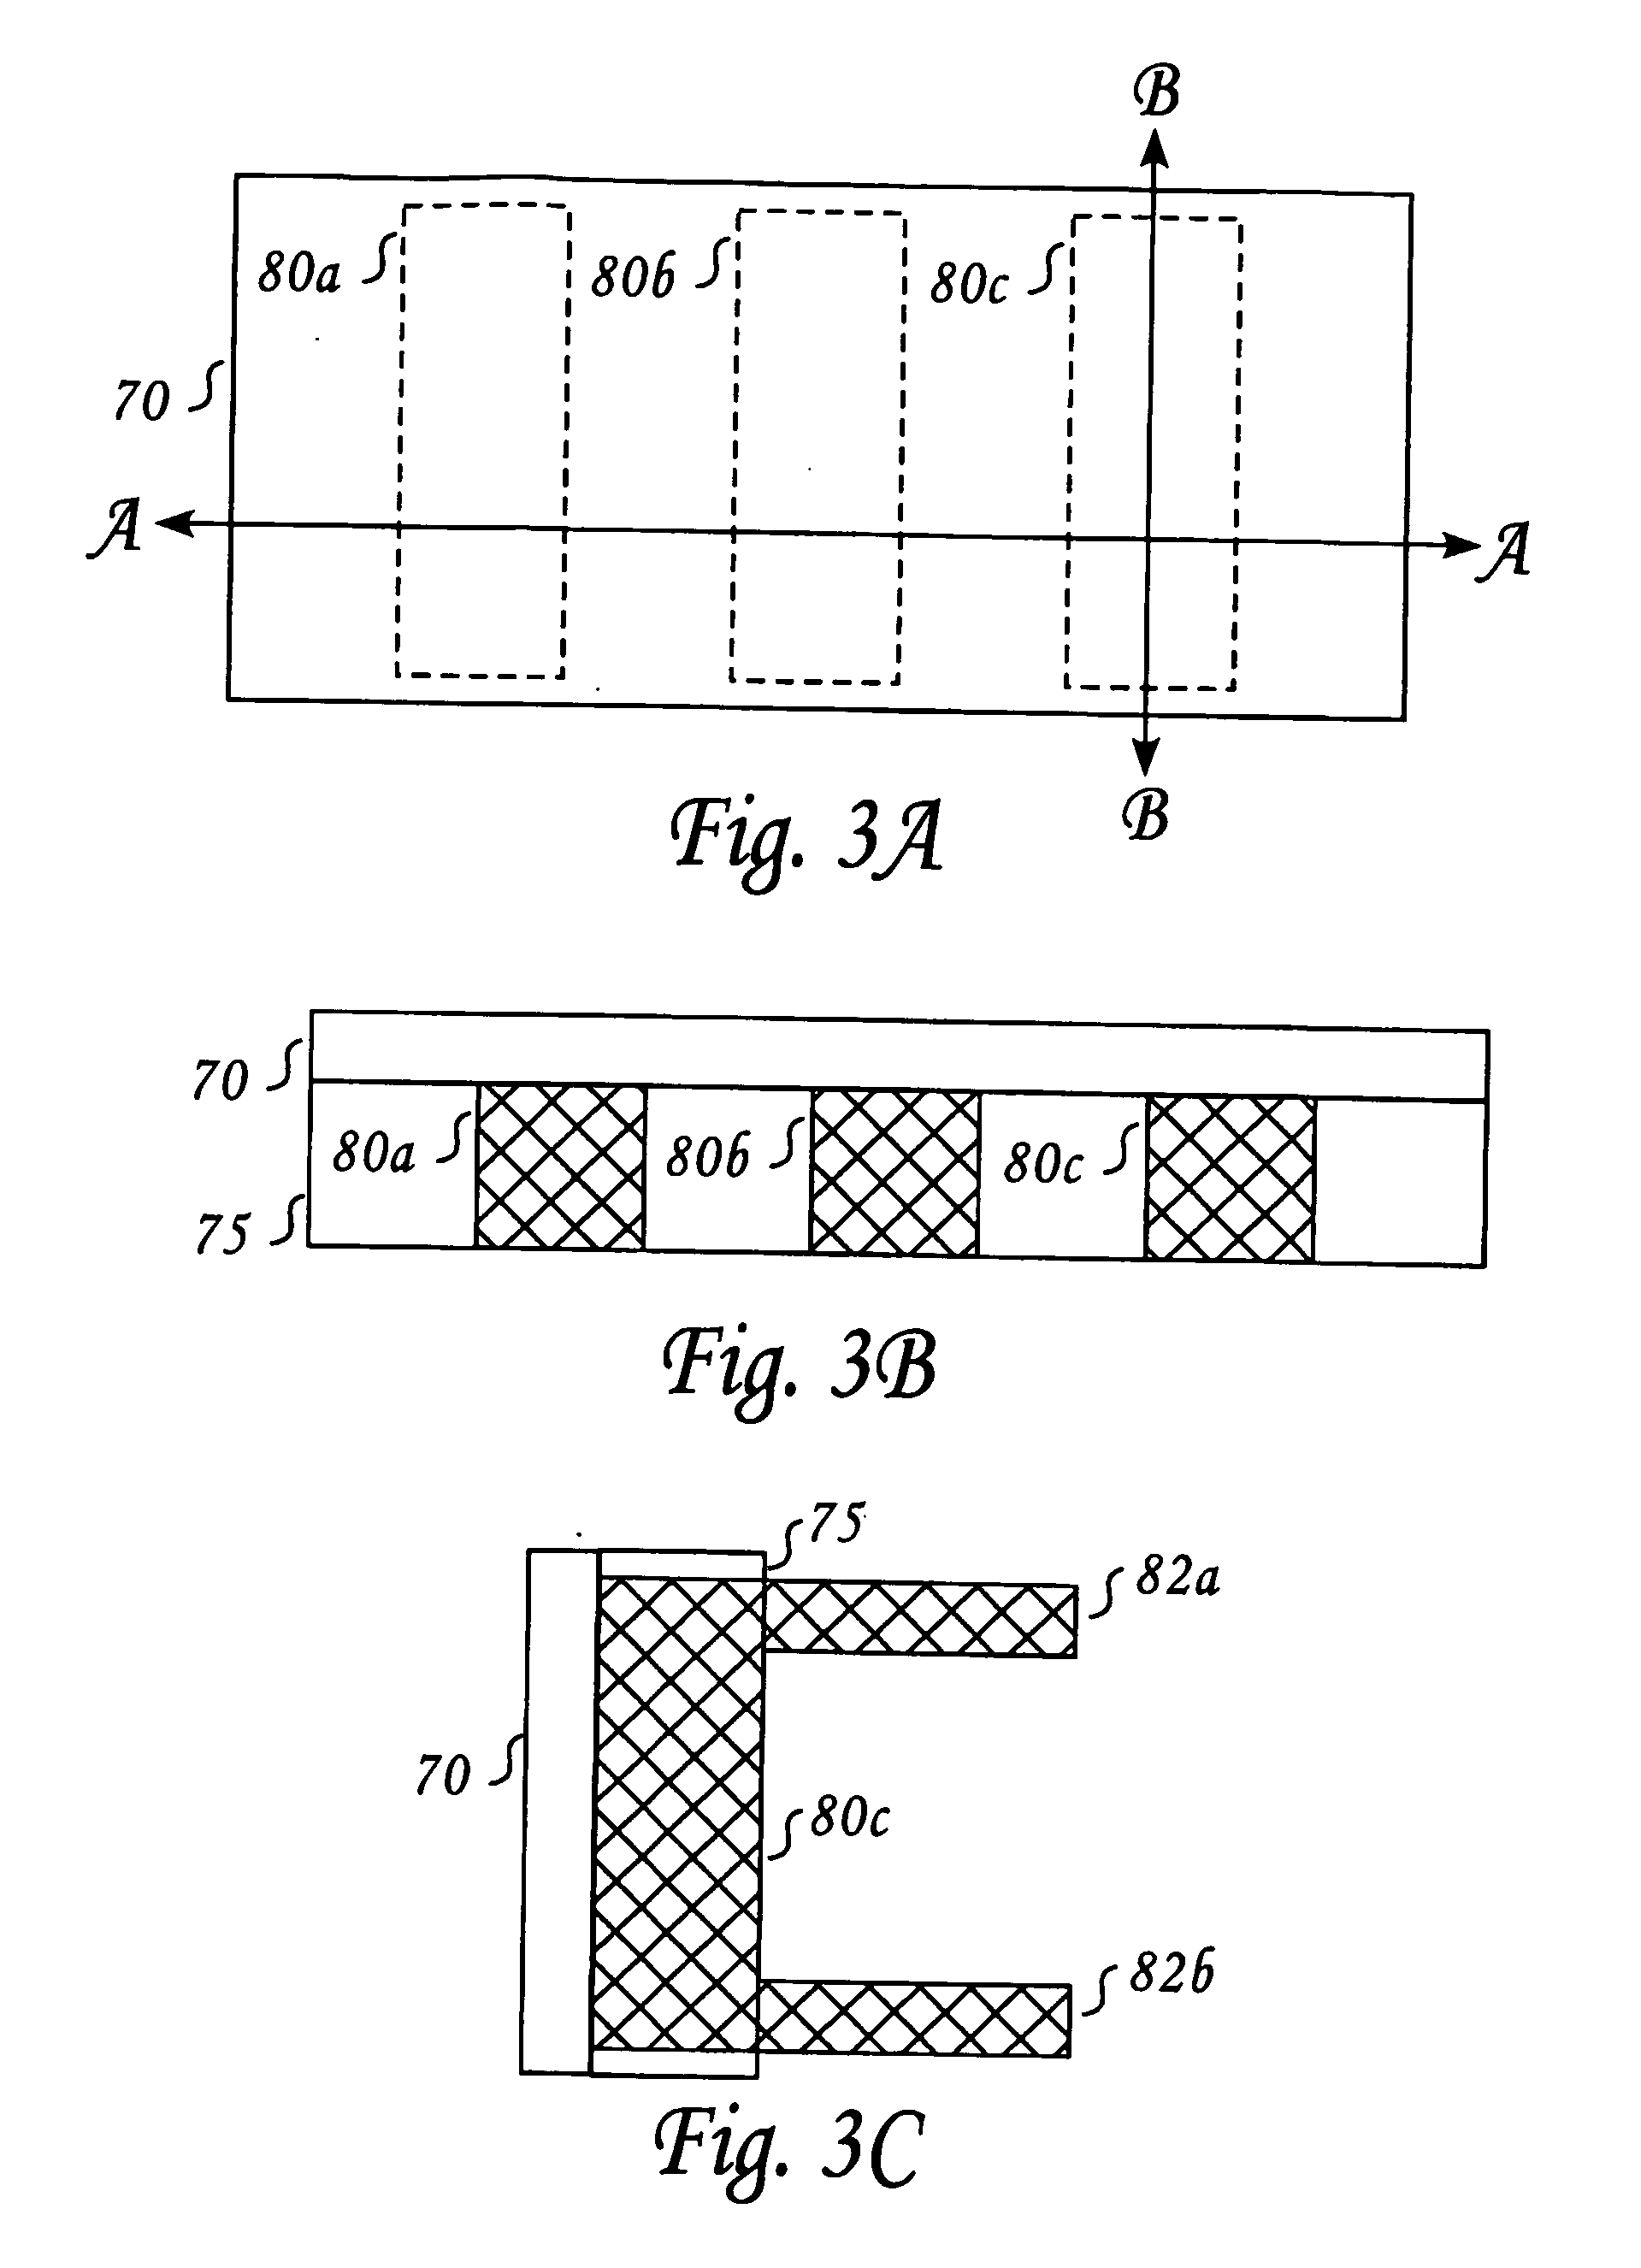 Method and system for data writing/reading onto/from and emulating a magnetic stripe